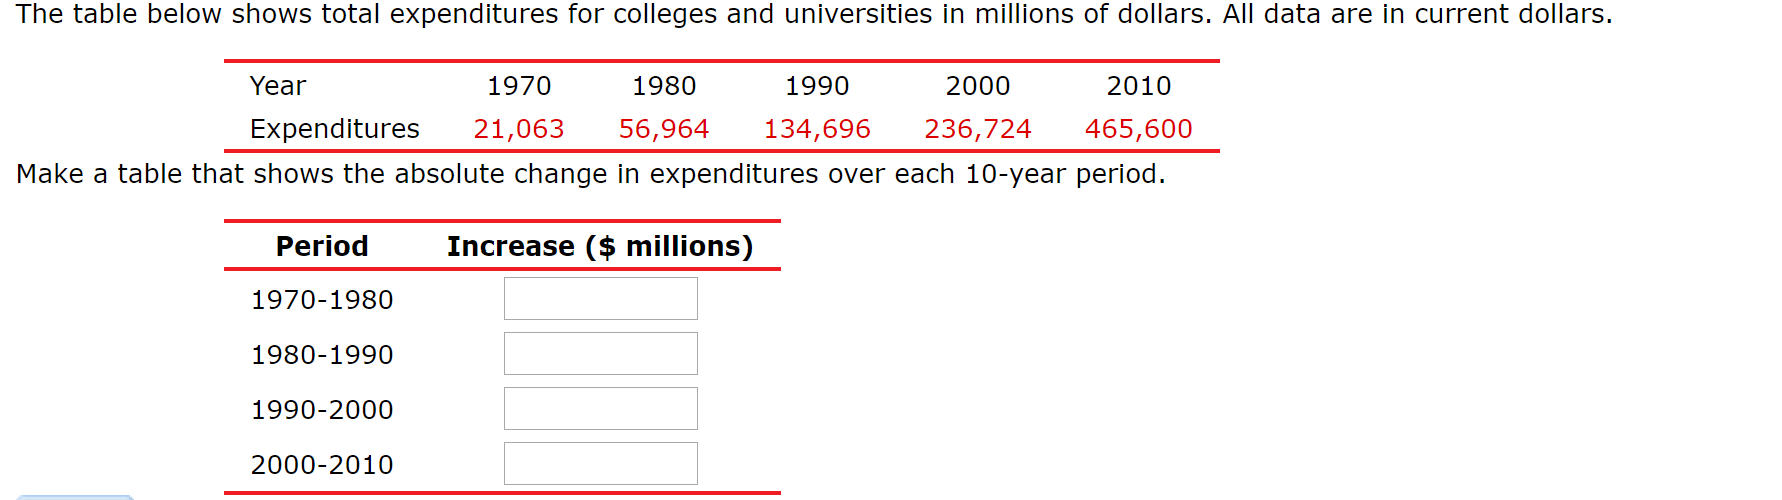 The table below shows total expenditures for colleges and universities in millions of dollars. All data are in current dollars.
1970
Year
1980
1990
2000
2010
236,724
Expenditures
21,063
56,964
134,696
465,600
Make a table that shows the absolute change in expenditures over each 10-year period.
Increase ($ millions)
Period
1970-1980
1980-1990
1990-2000
2000-2010
